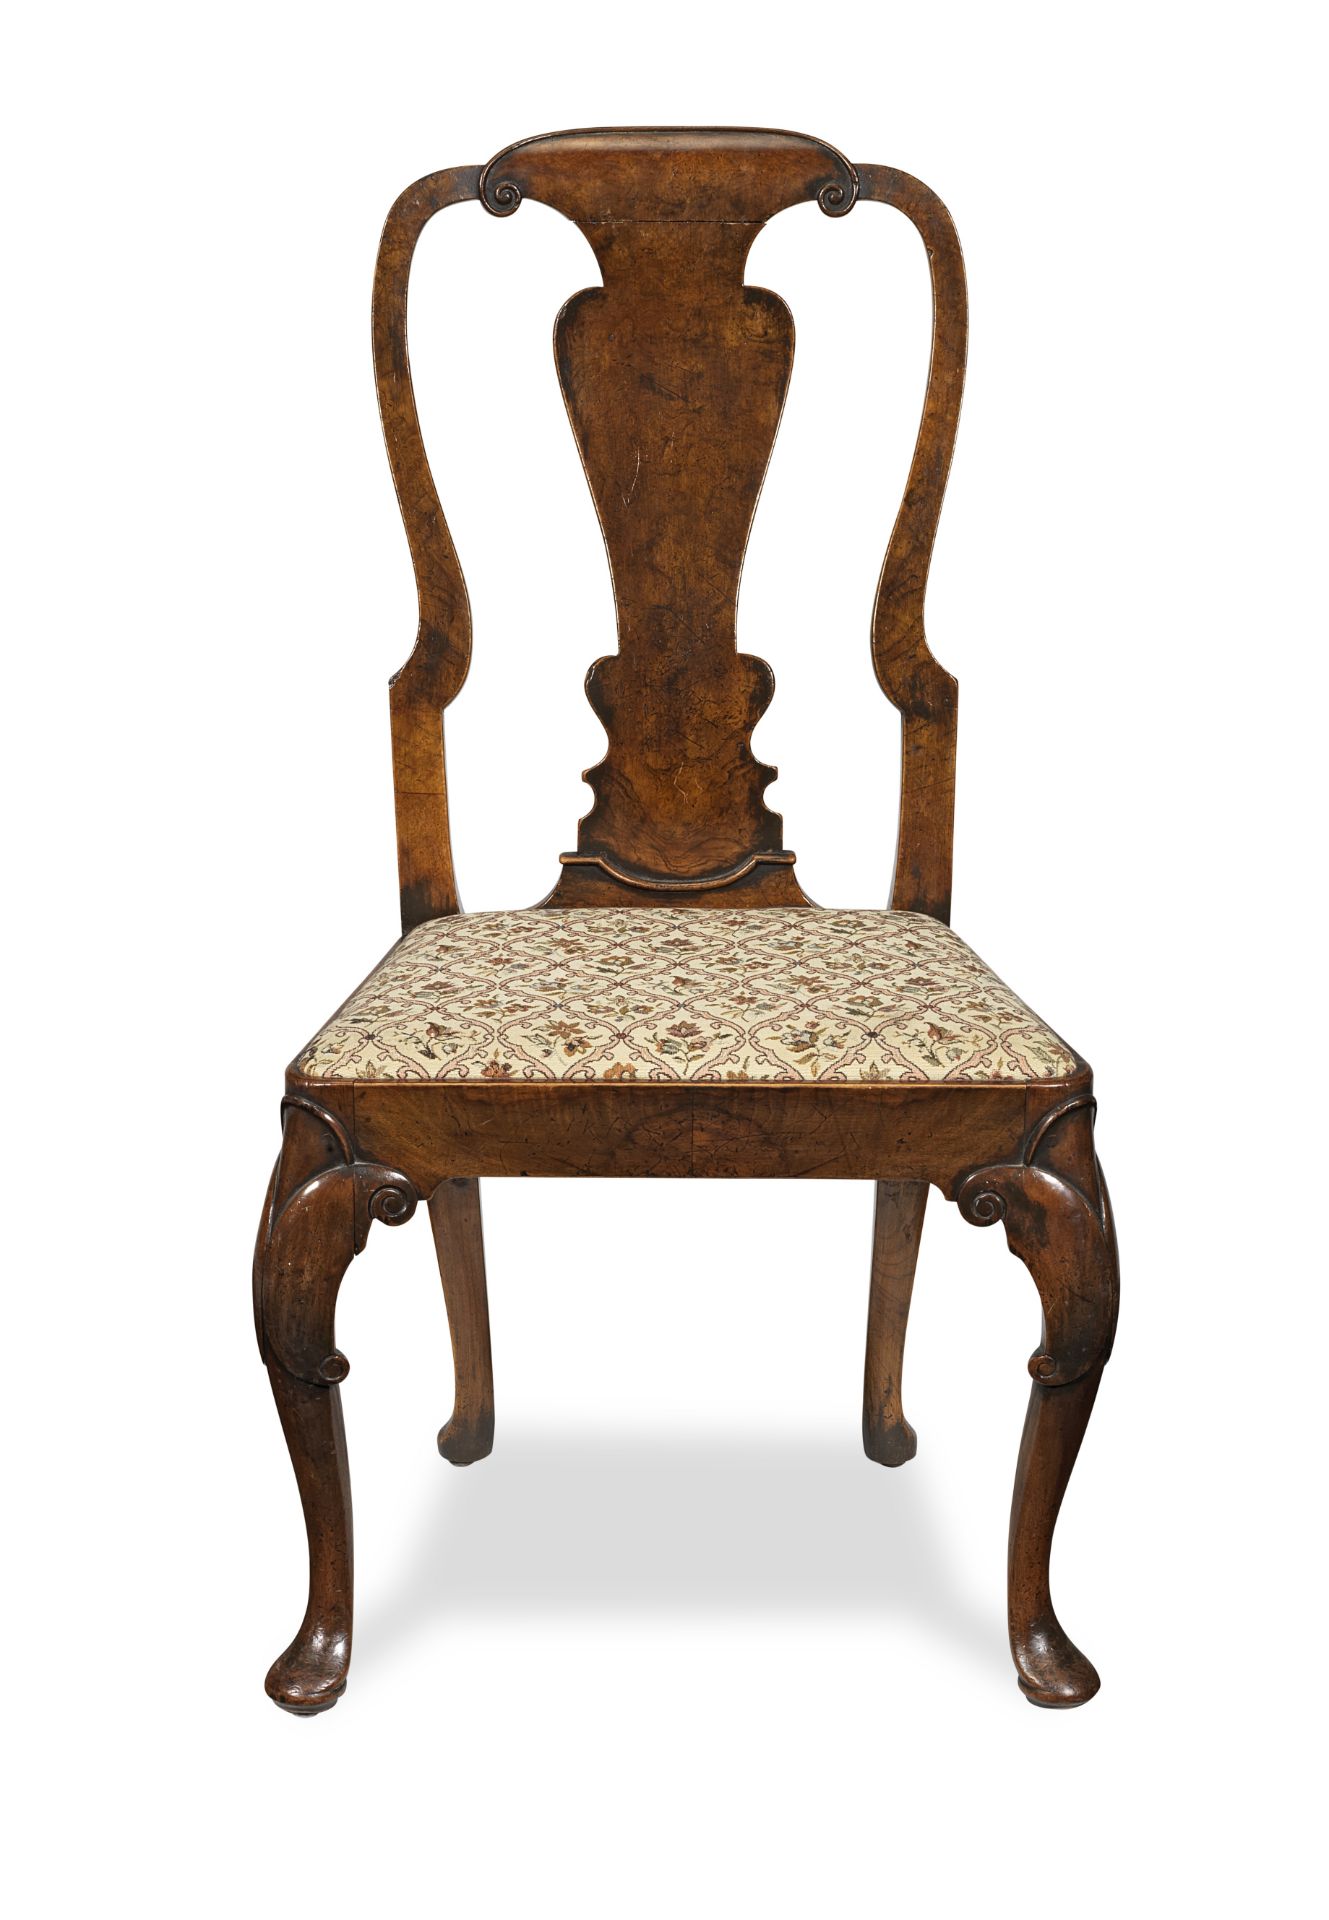 A late 19th/early 20th century walnut side chair in the George I style